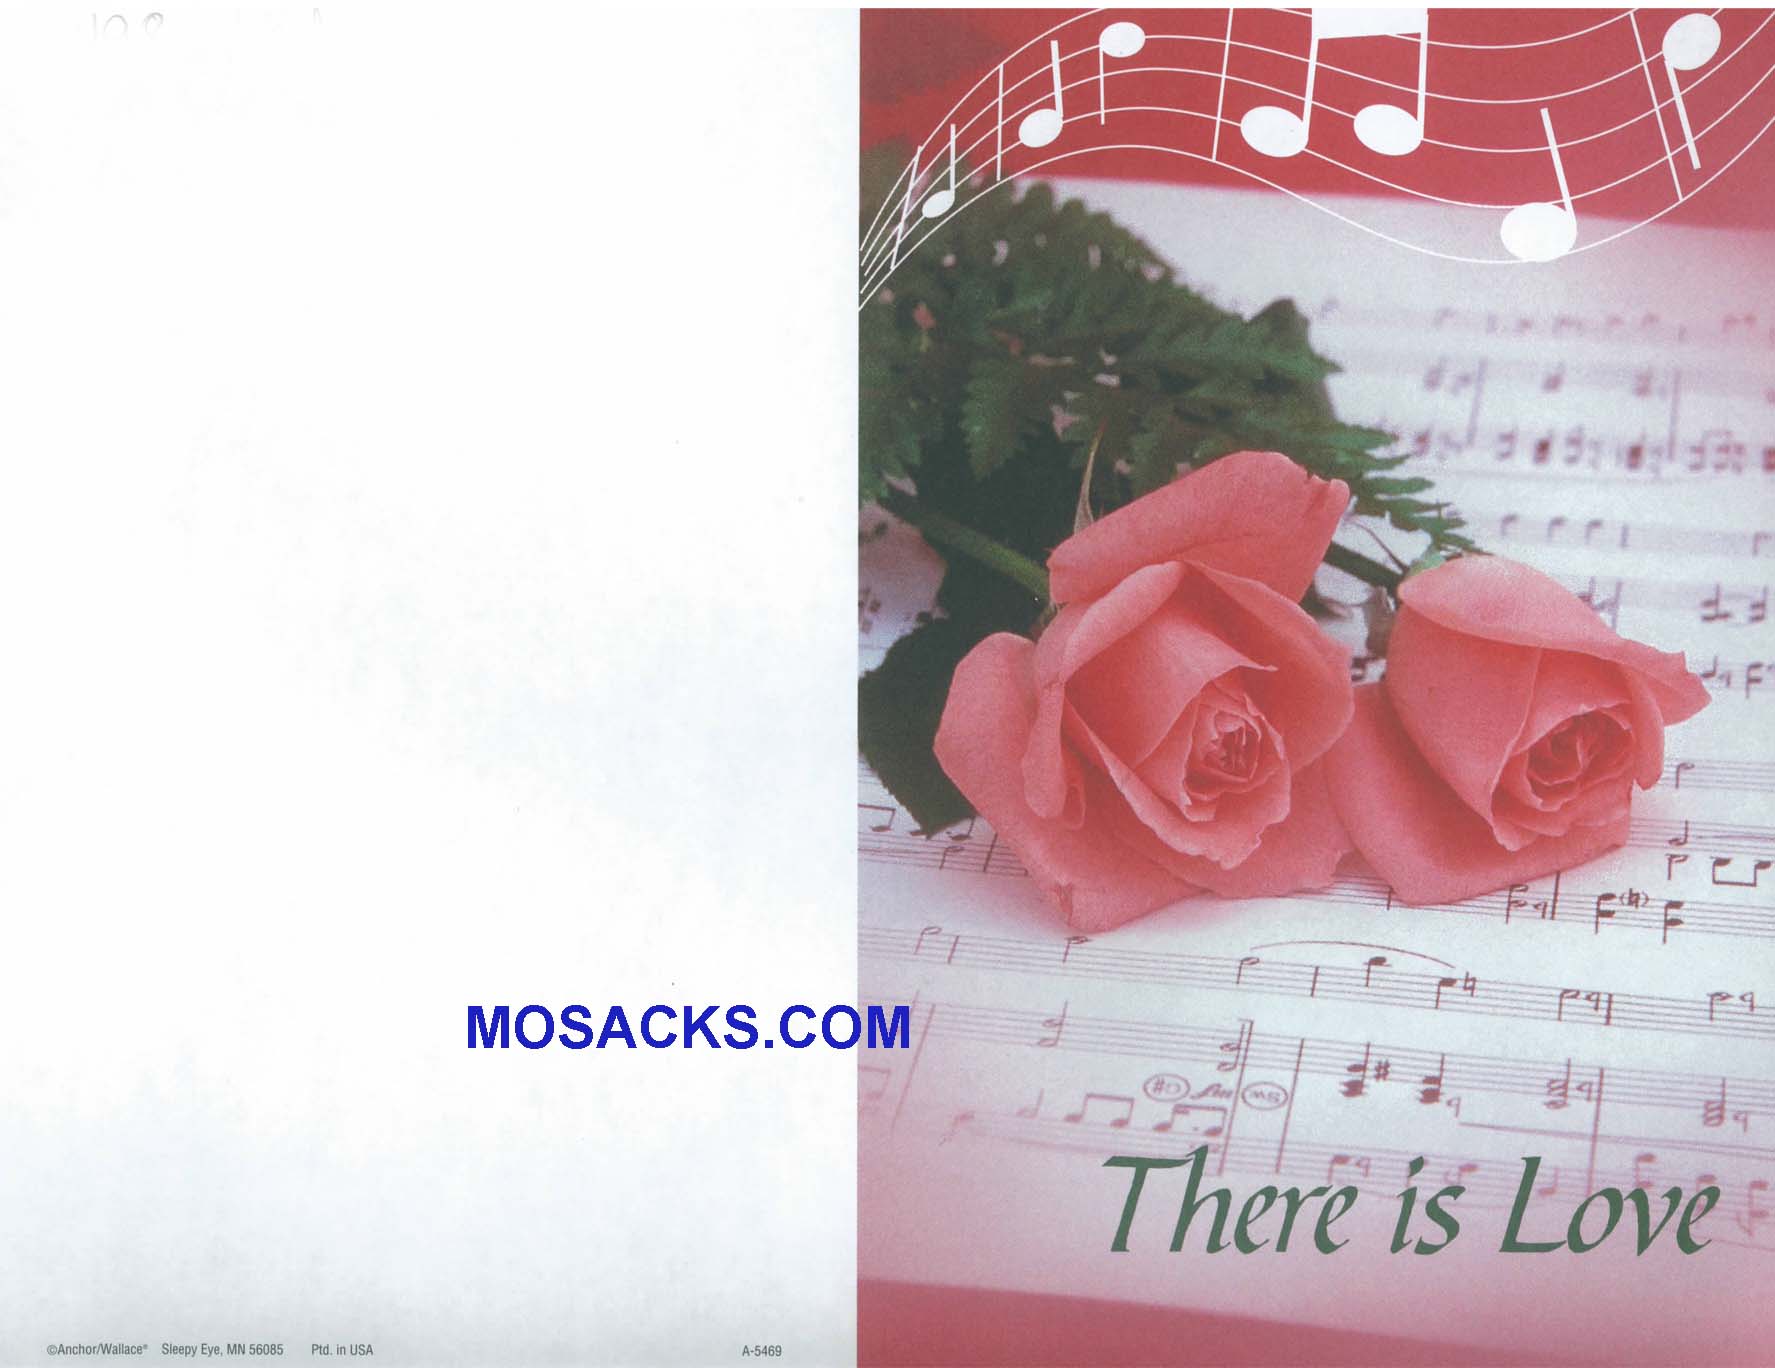 Wedding Bulletin Covers There Is Love 100 Pack-A5469, Wedding Cover